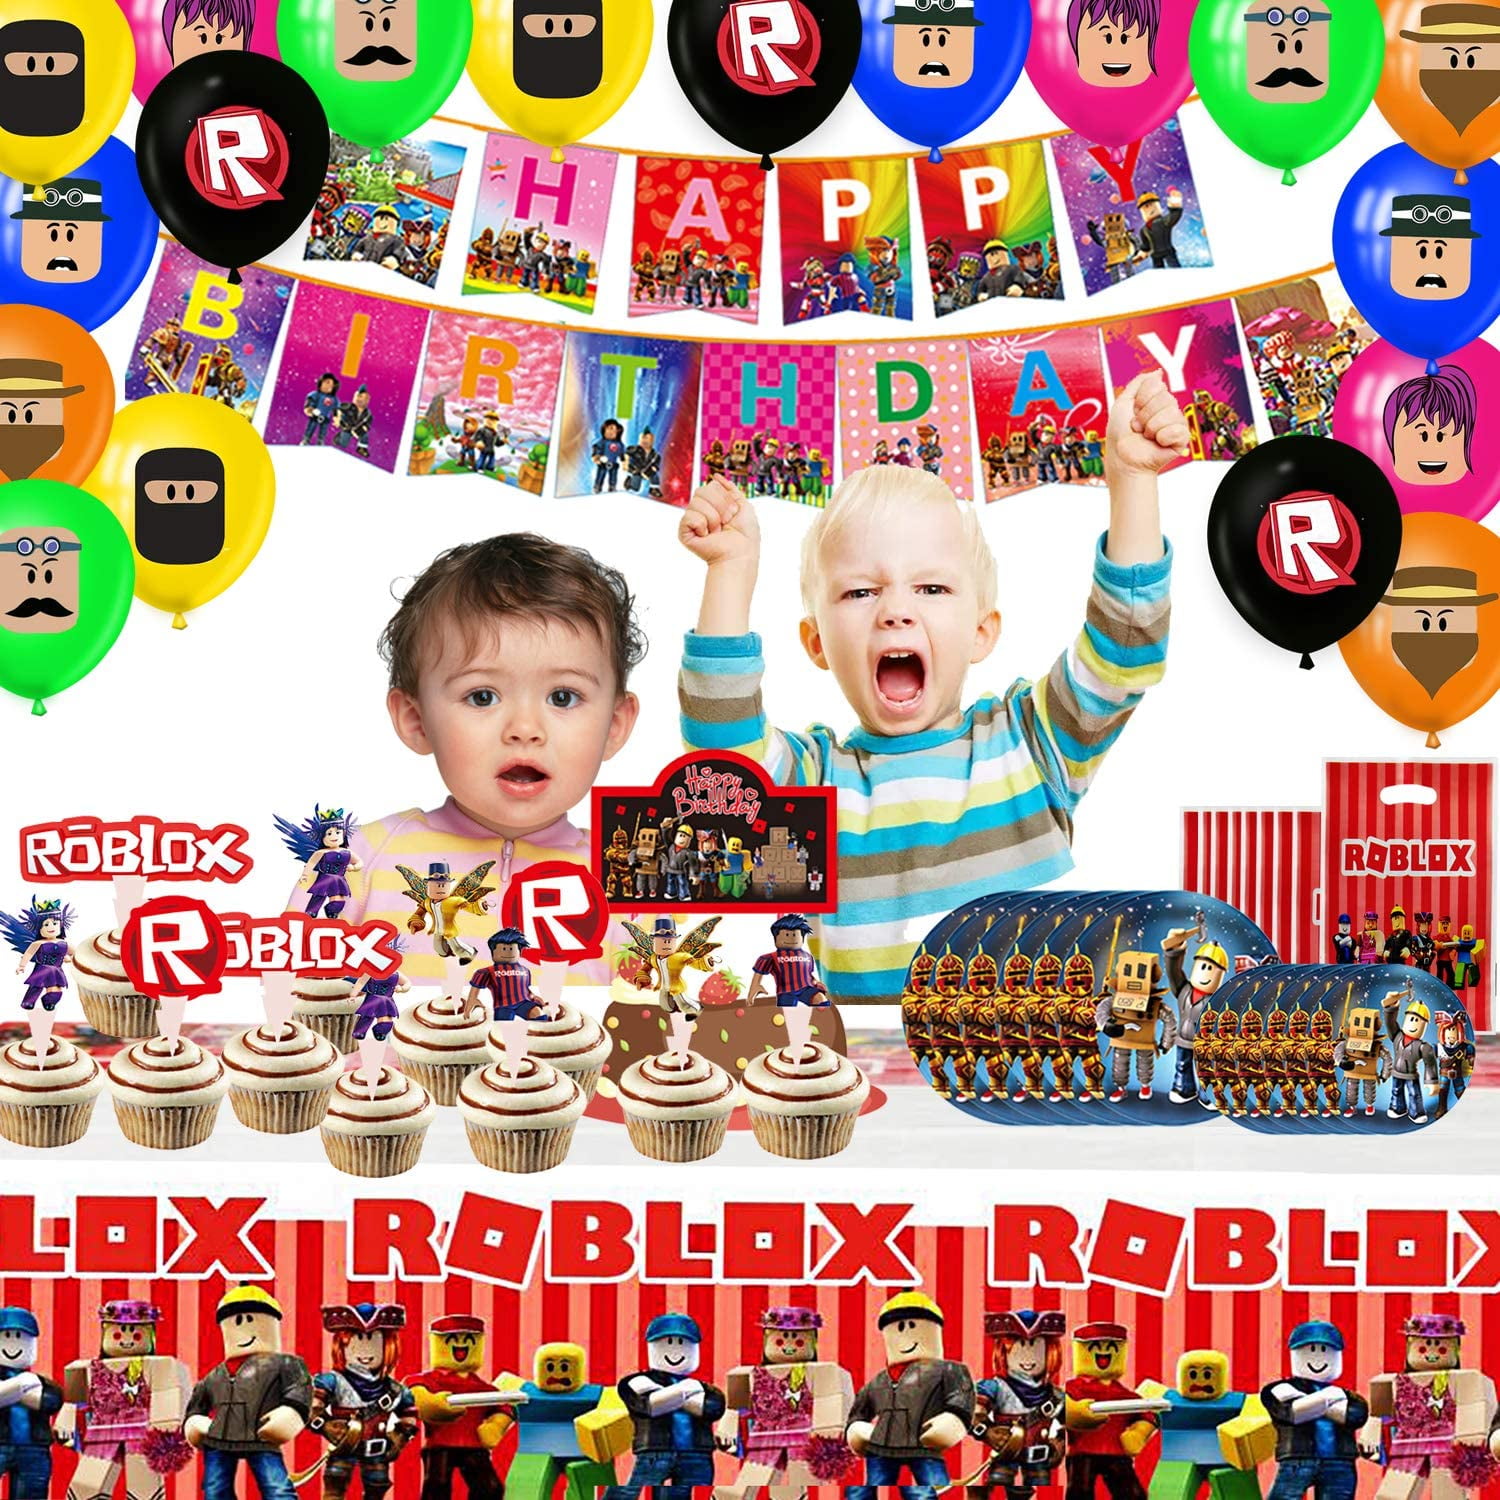 105 Pcs Roblox Birthday Party Supplies Robot Blocks Party Decorations Banners Cake Topper Plates Forks Gift Bags Cupcake Toppers Tablecover Napkins And Balloons Walmart Com Walmart Com - roblox gift bag ideas